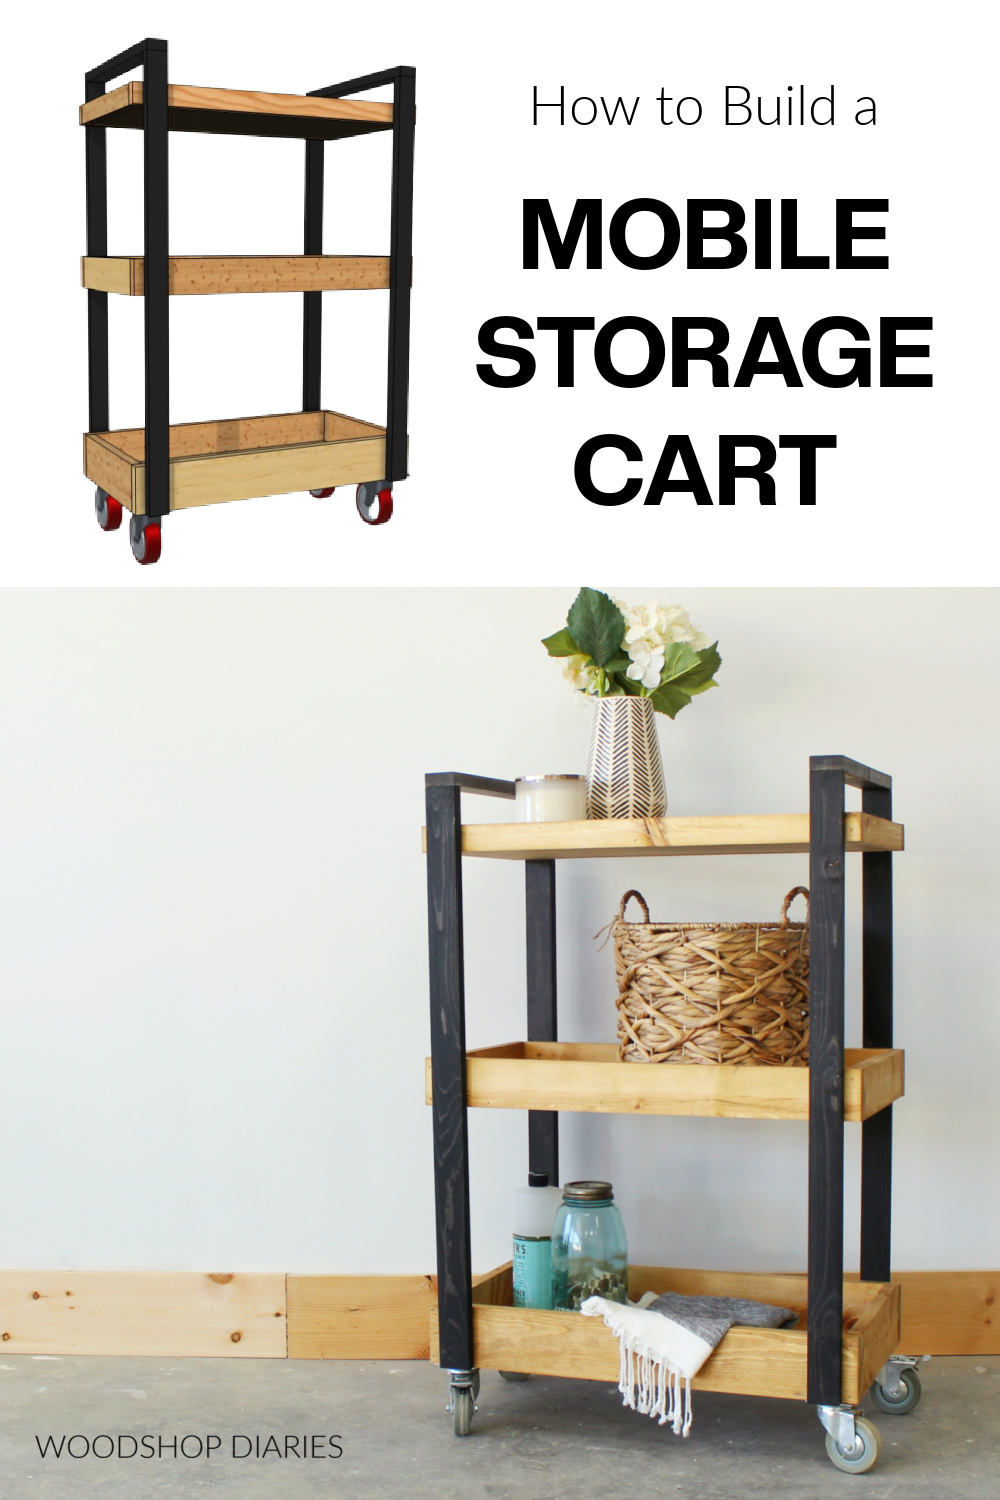 Mobile storage cart pinterest collage with diagram of MakeByMe rendering at top and completed project at bottom with text "how to build a mobile storage cart"